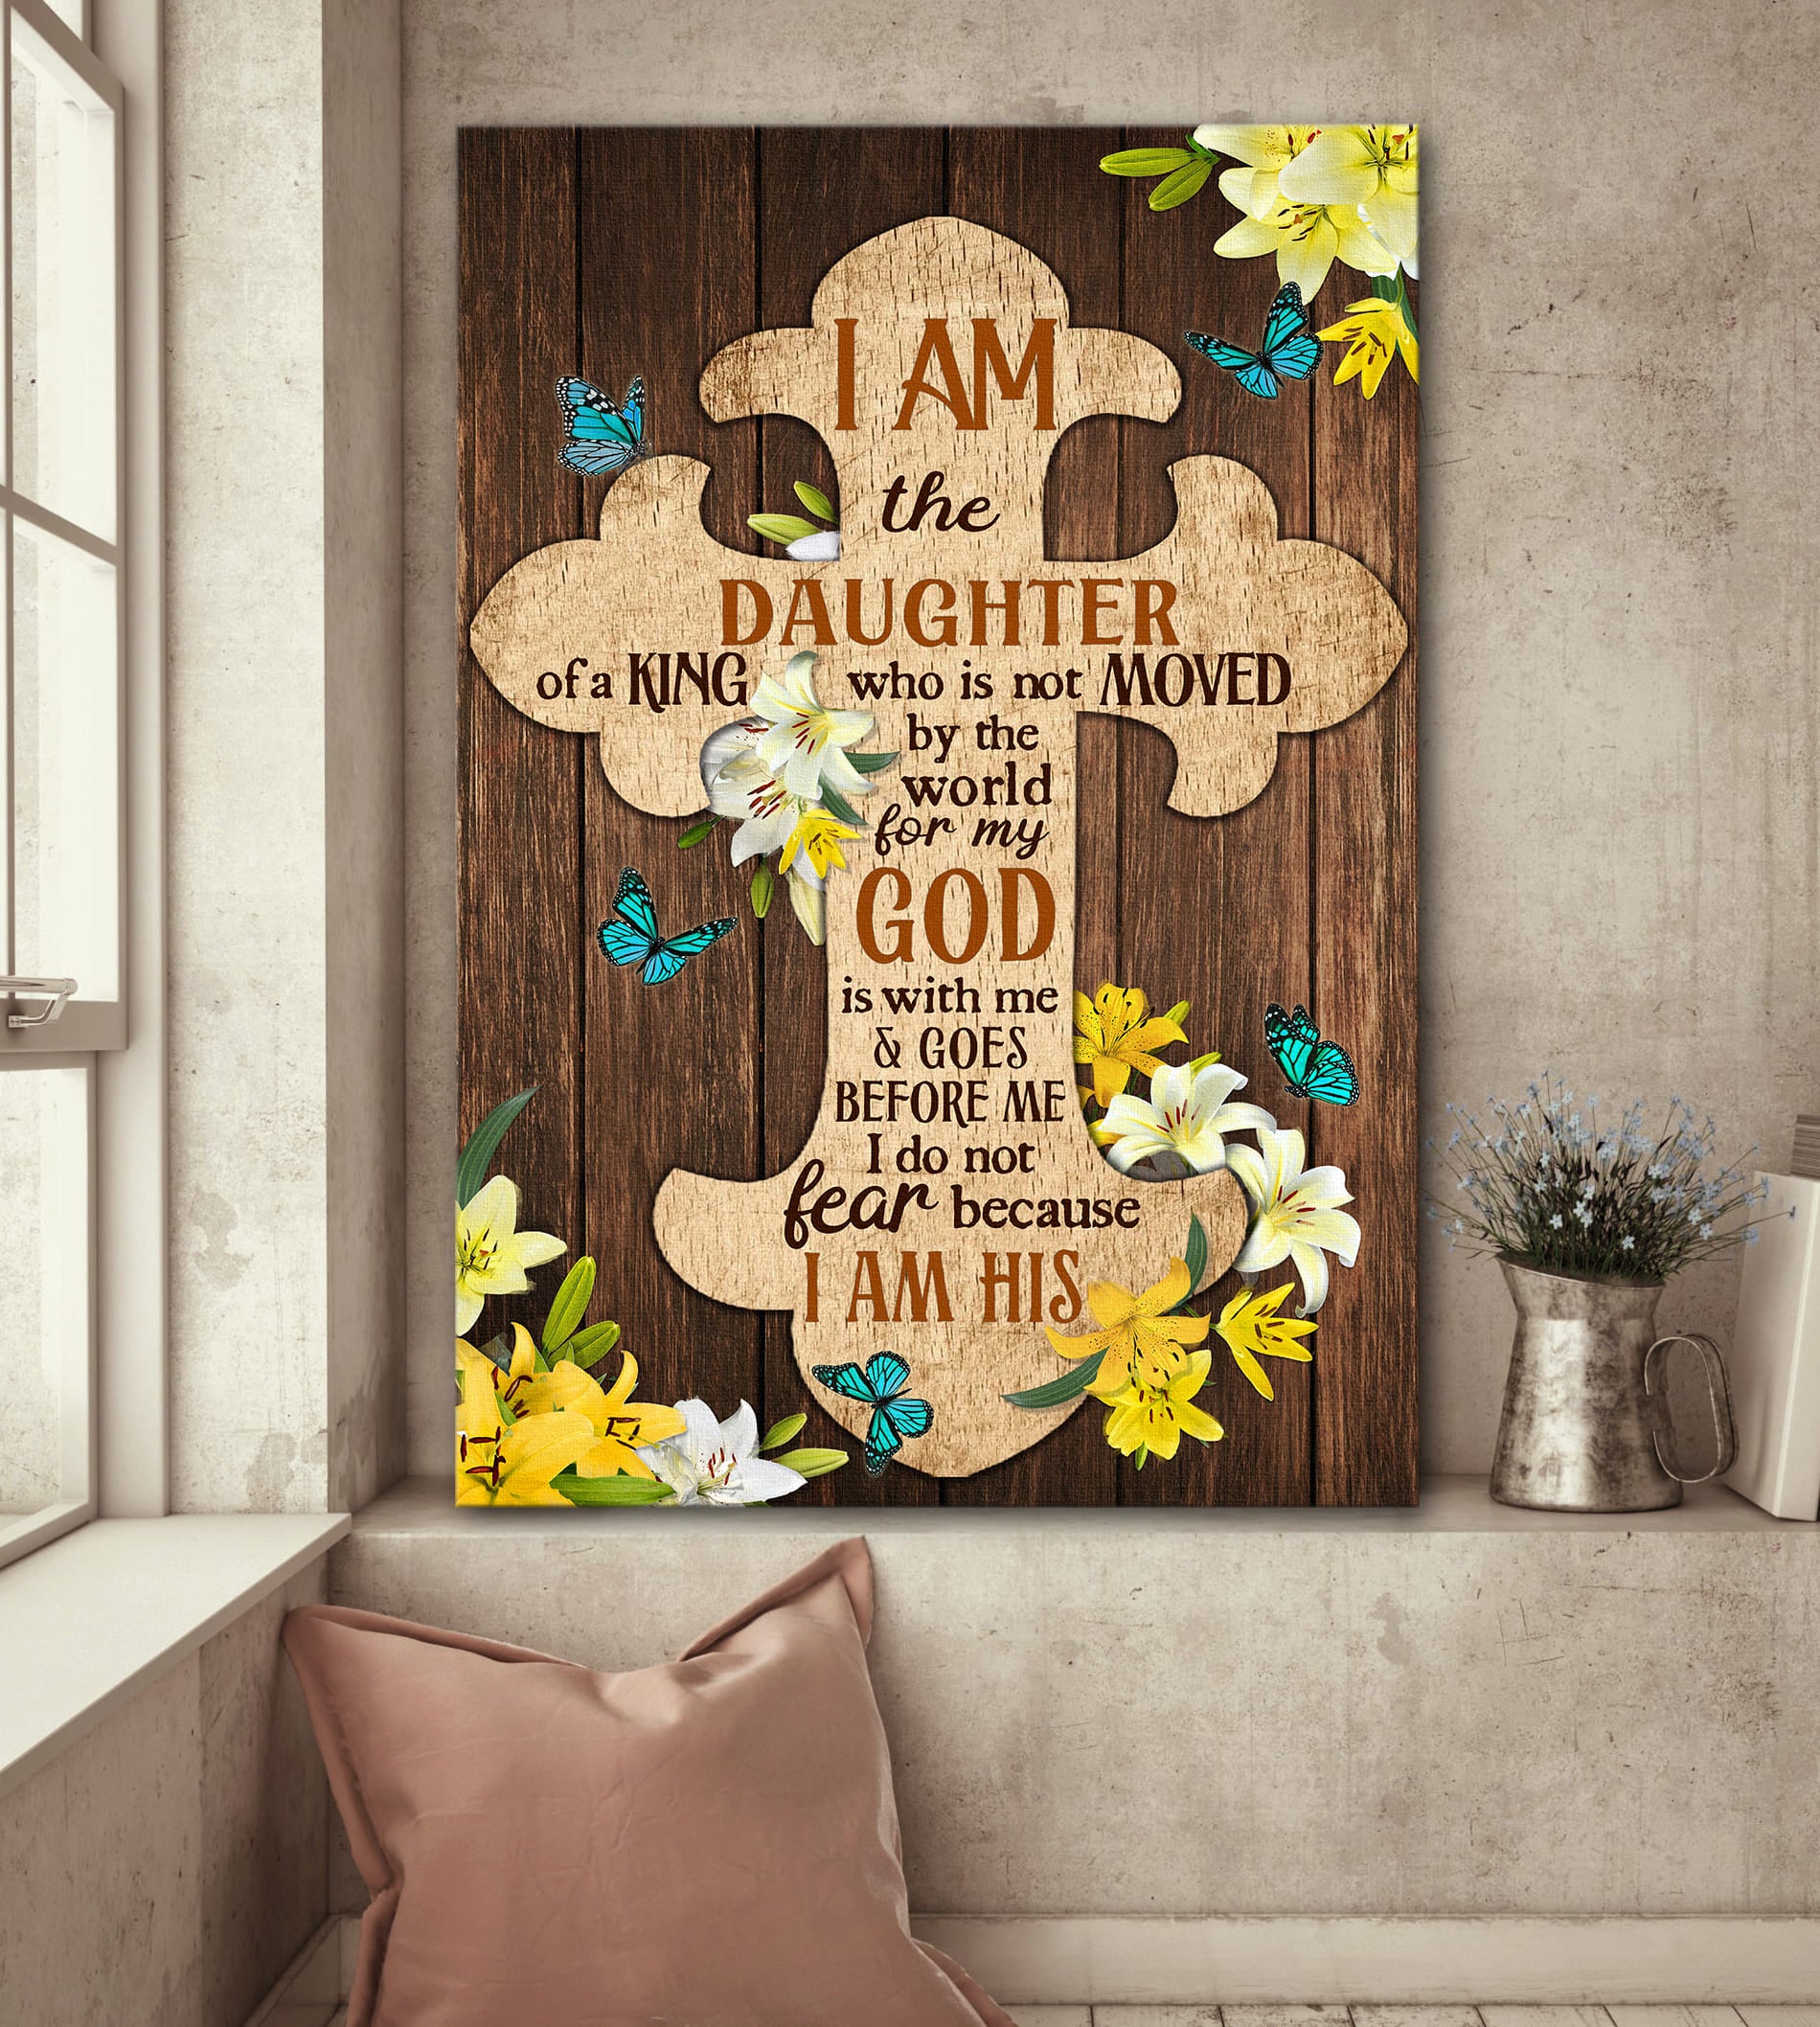 The wooden cross, Lily flower, I am the daughter of a King - Jesus Portrait Canvas Prints, Wall Art